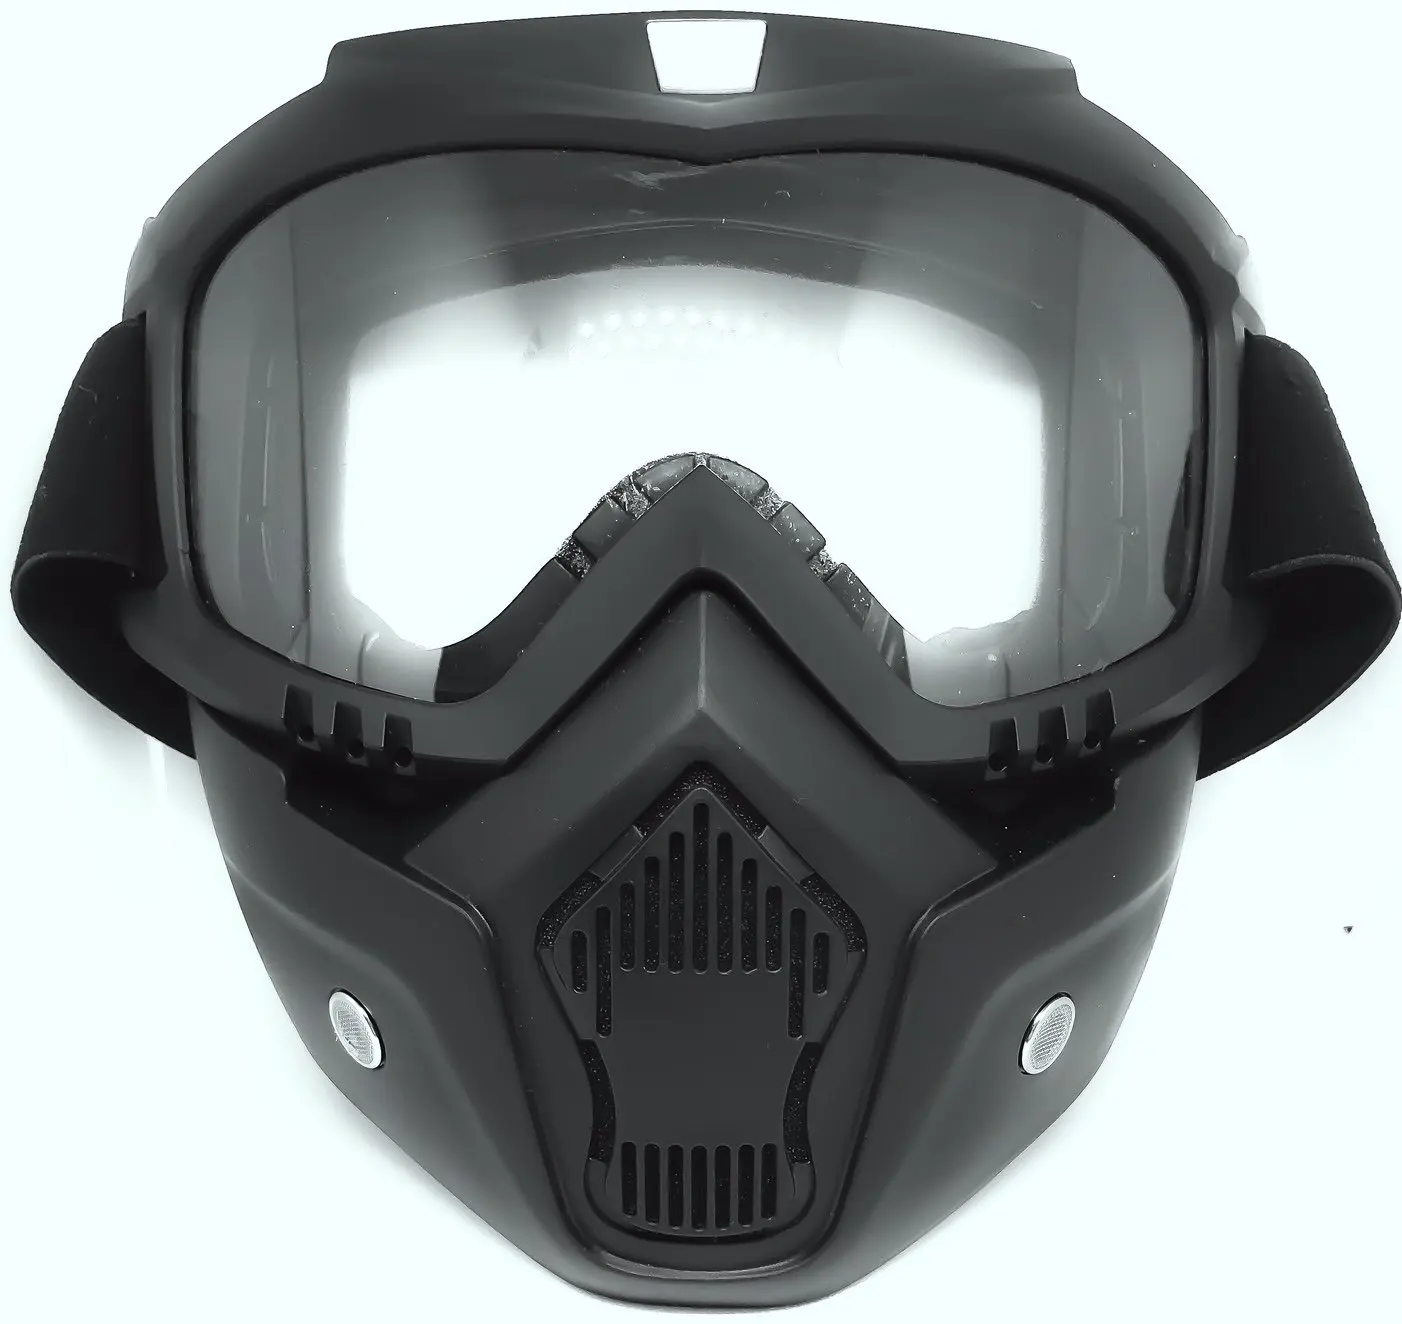 Best airsoft mask